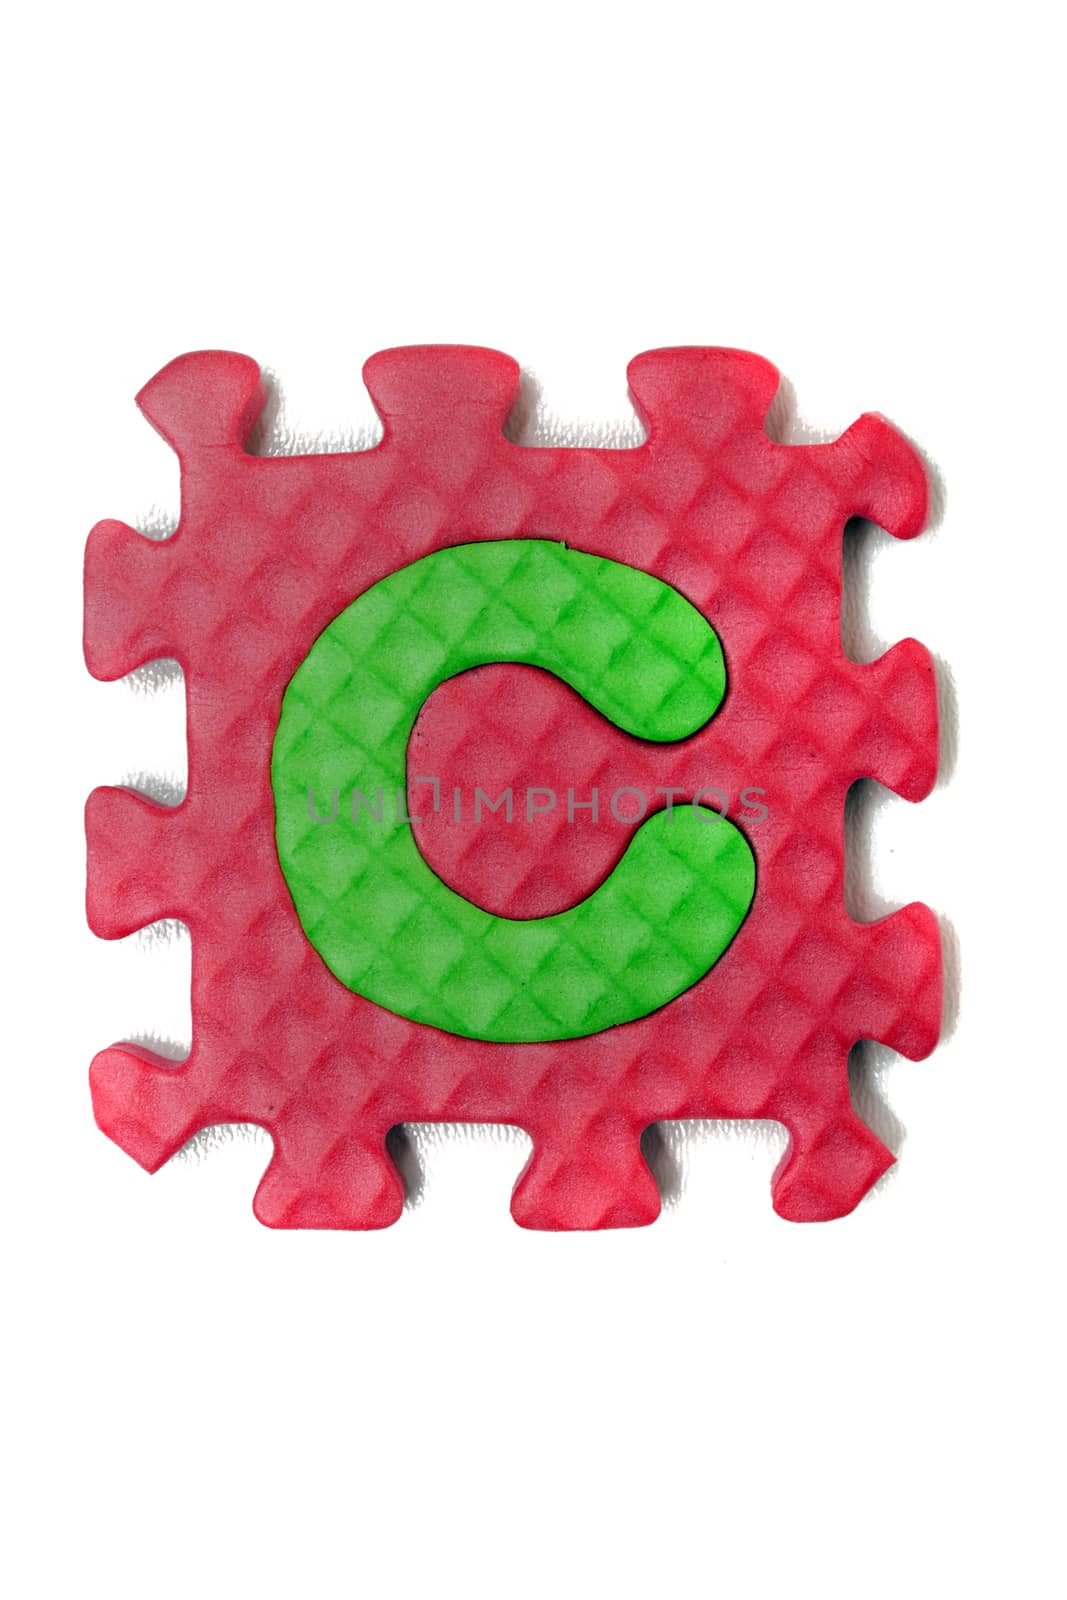 Foam puzzle letter uppercase isolated on a white background.